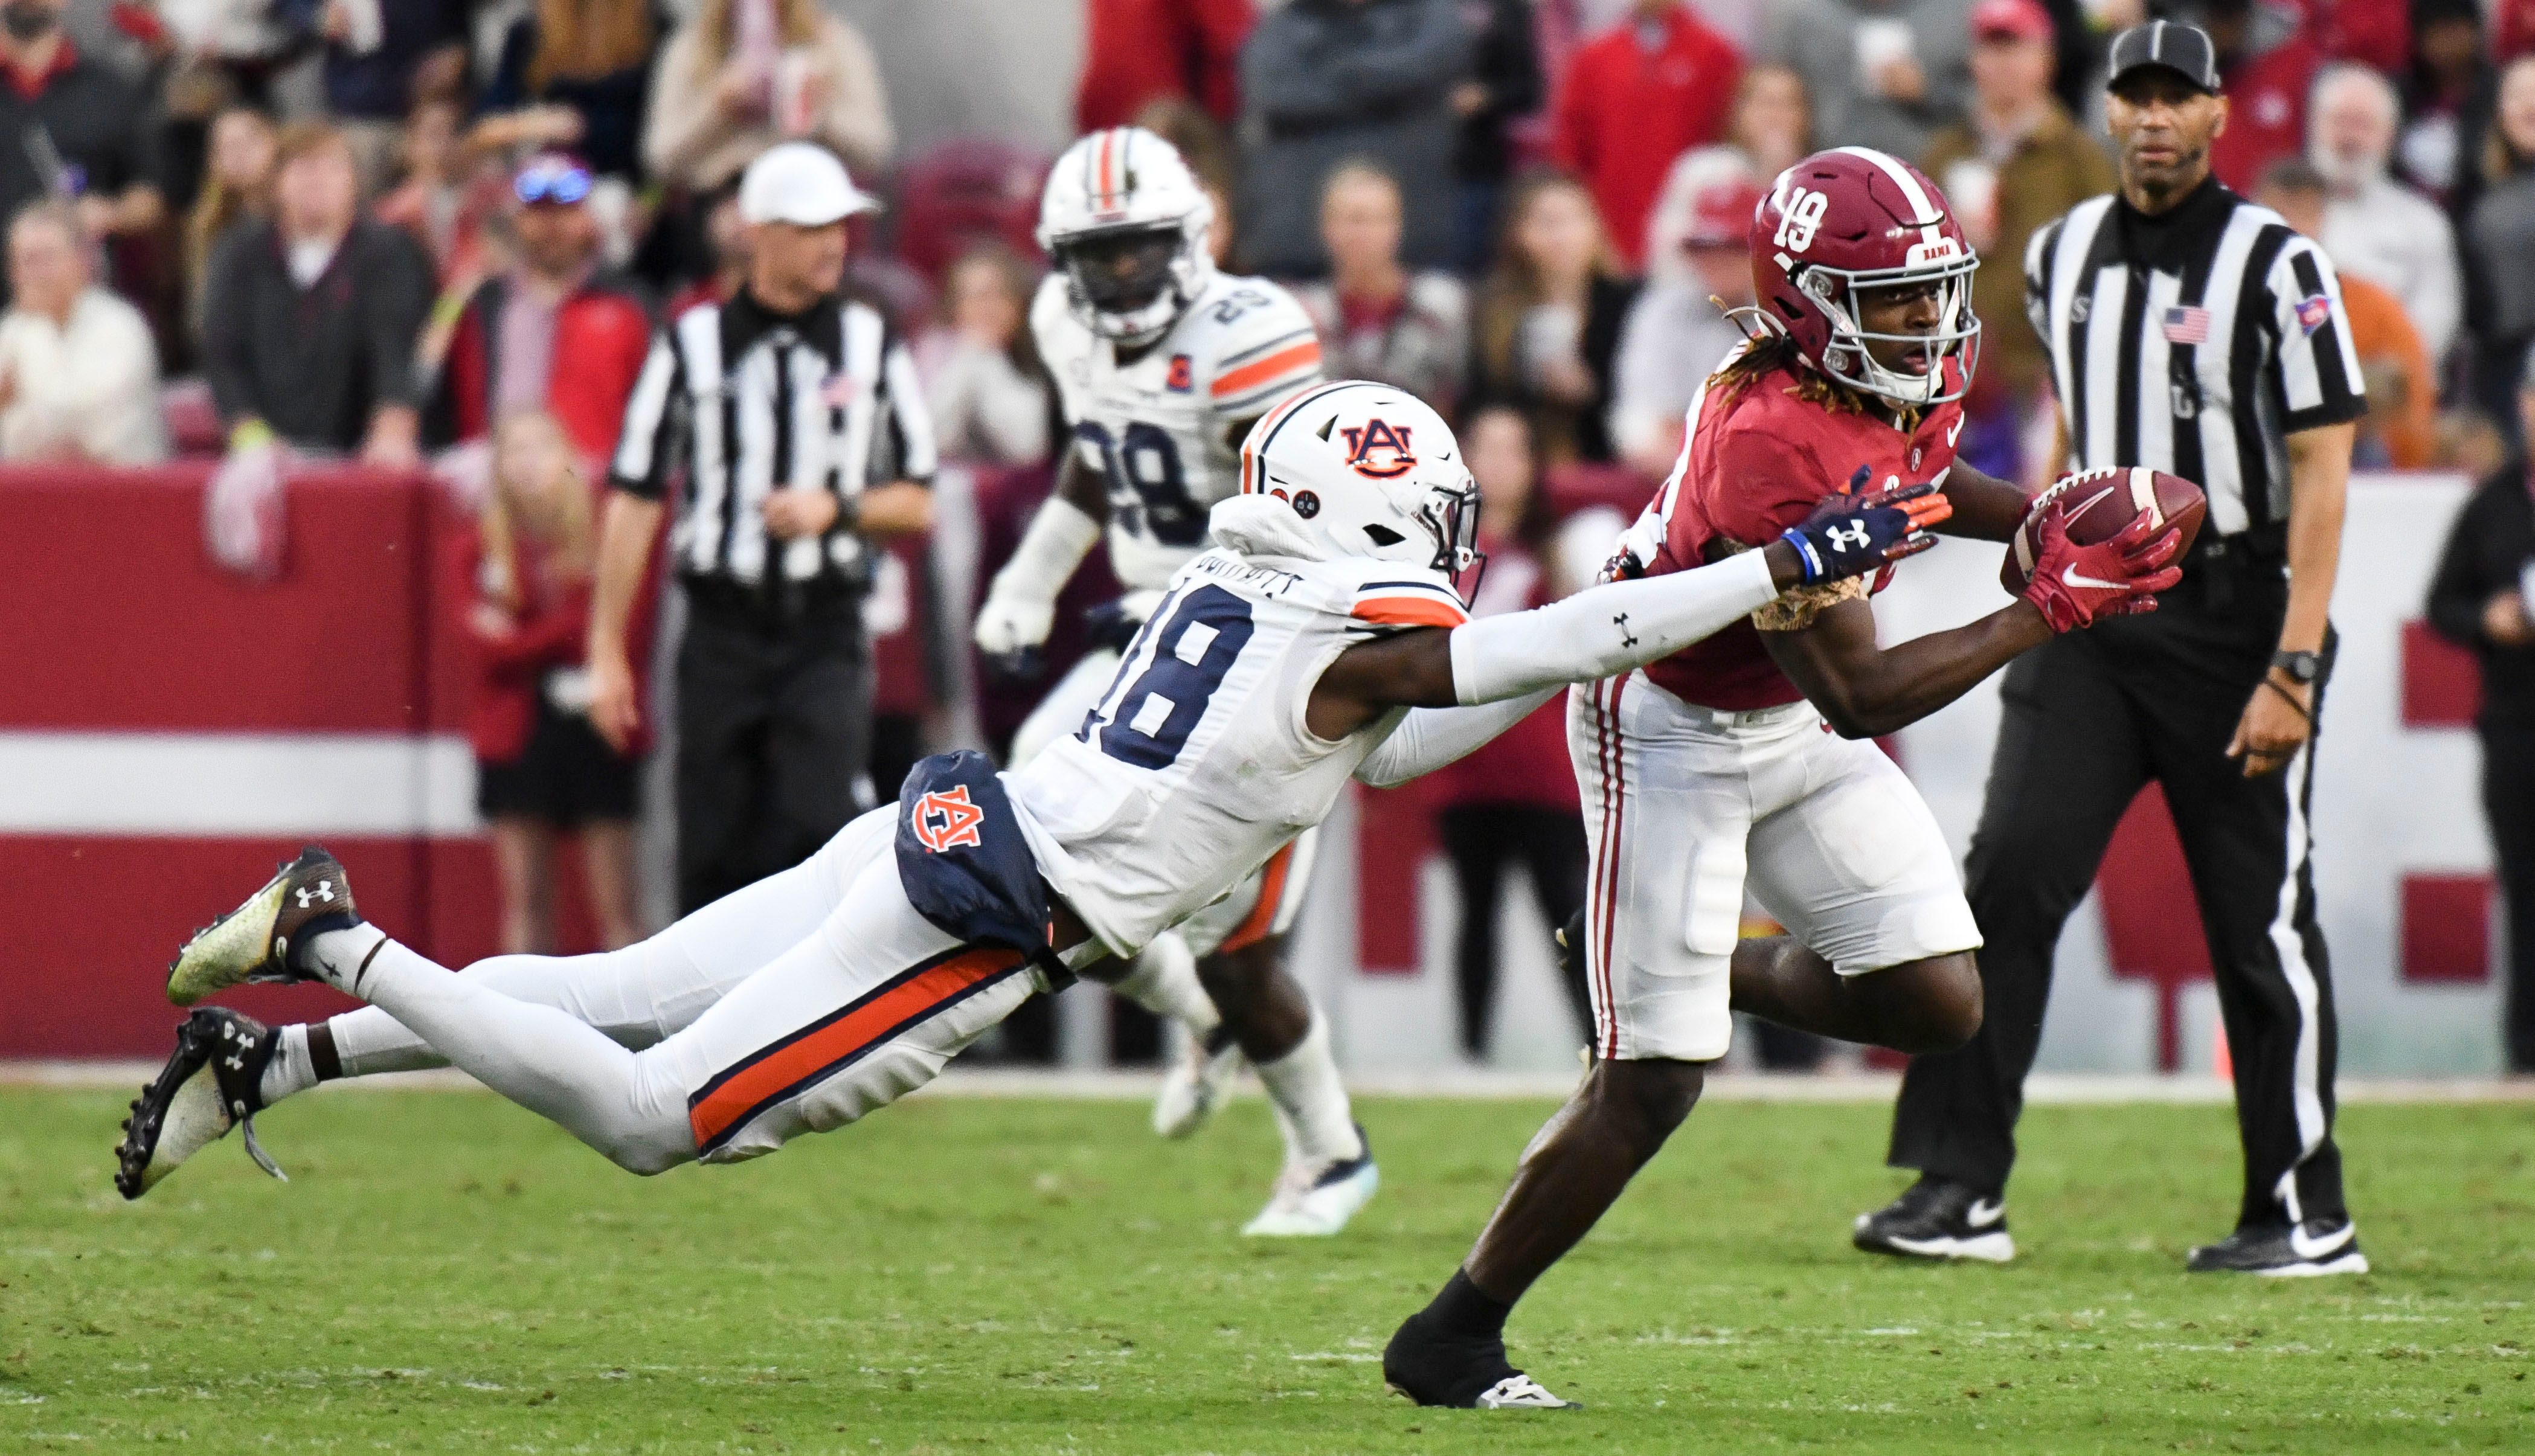 Here’s how Alabama football’s wide receivers shape up heading into fall camp